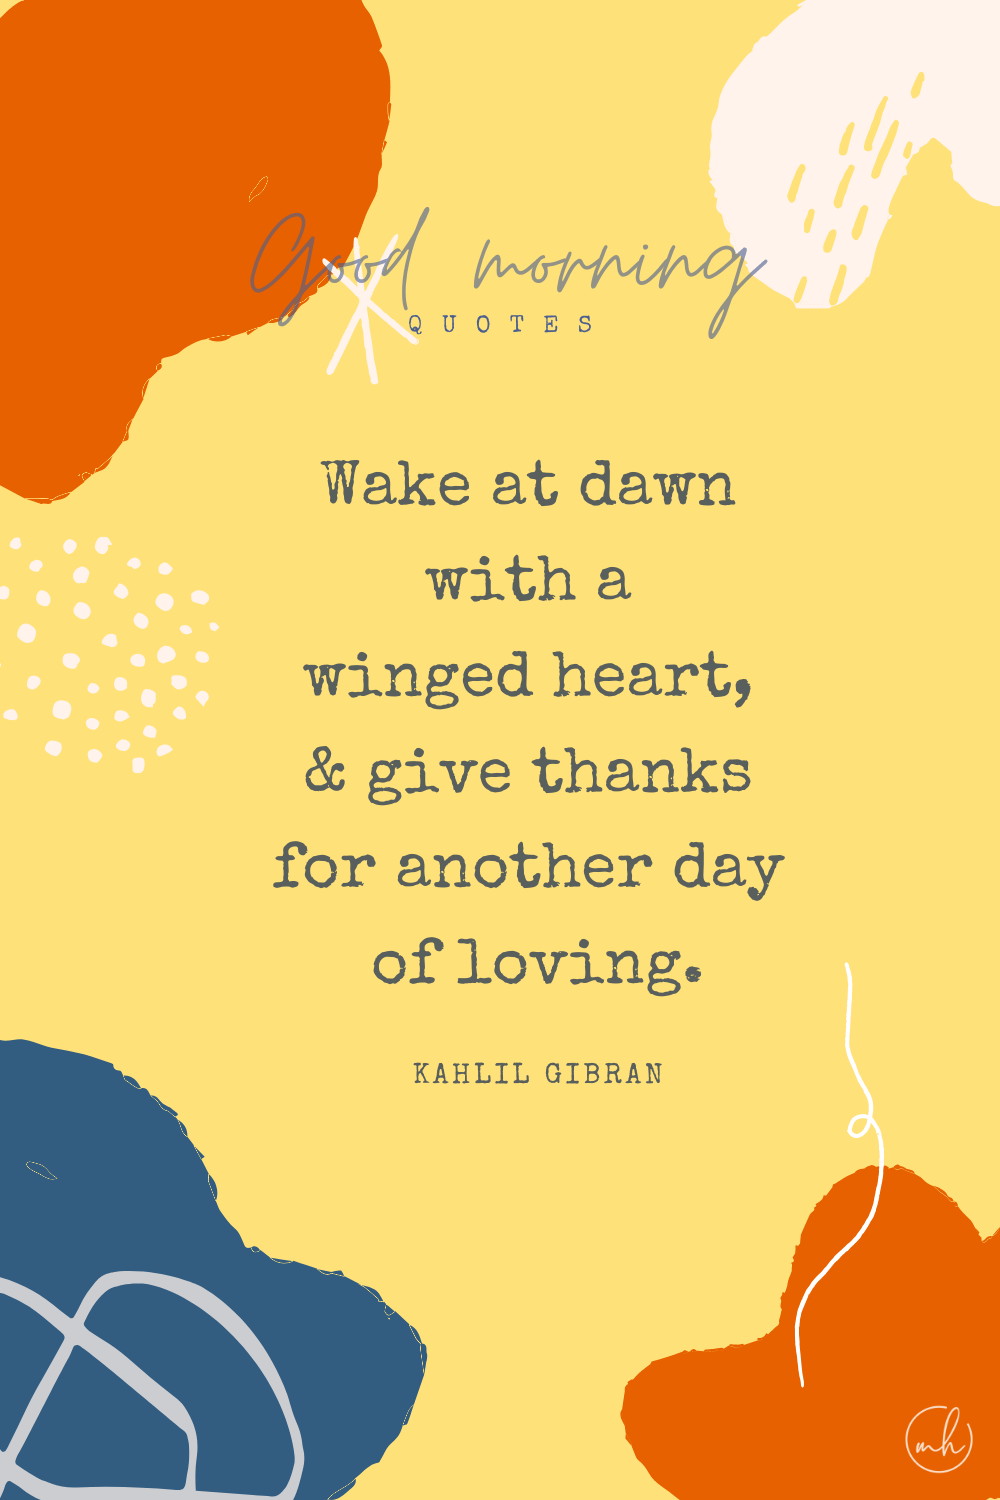 "Wake in the morning with a winged heart and give thanks for another day of loving." – Kahlil Gibran